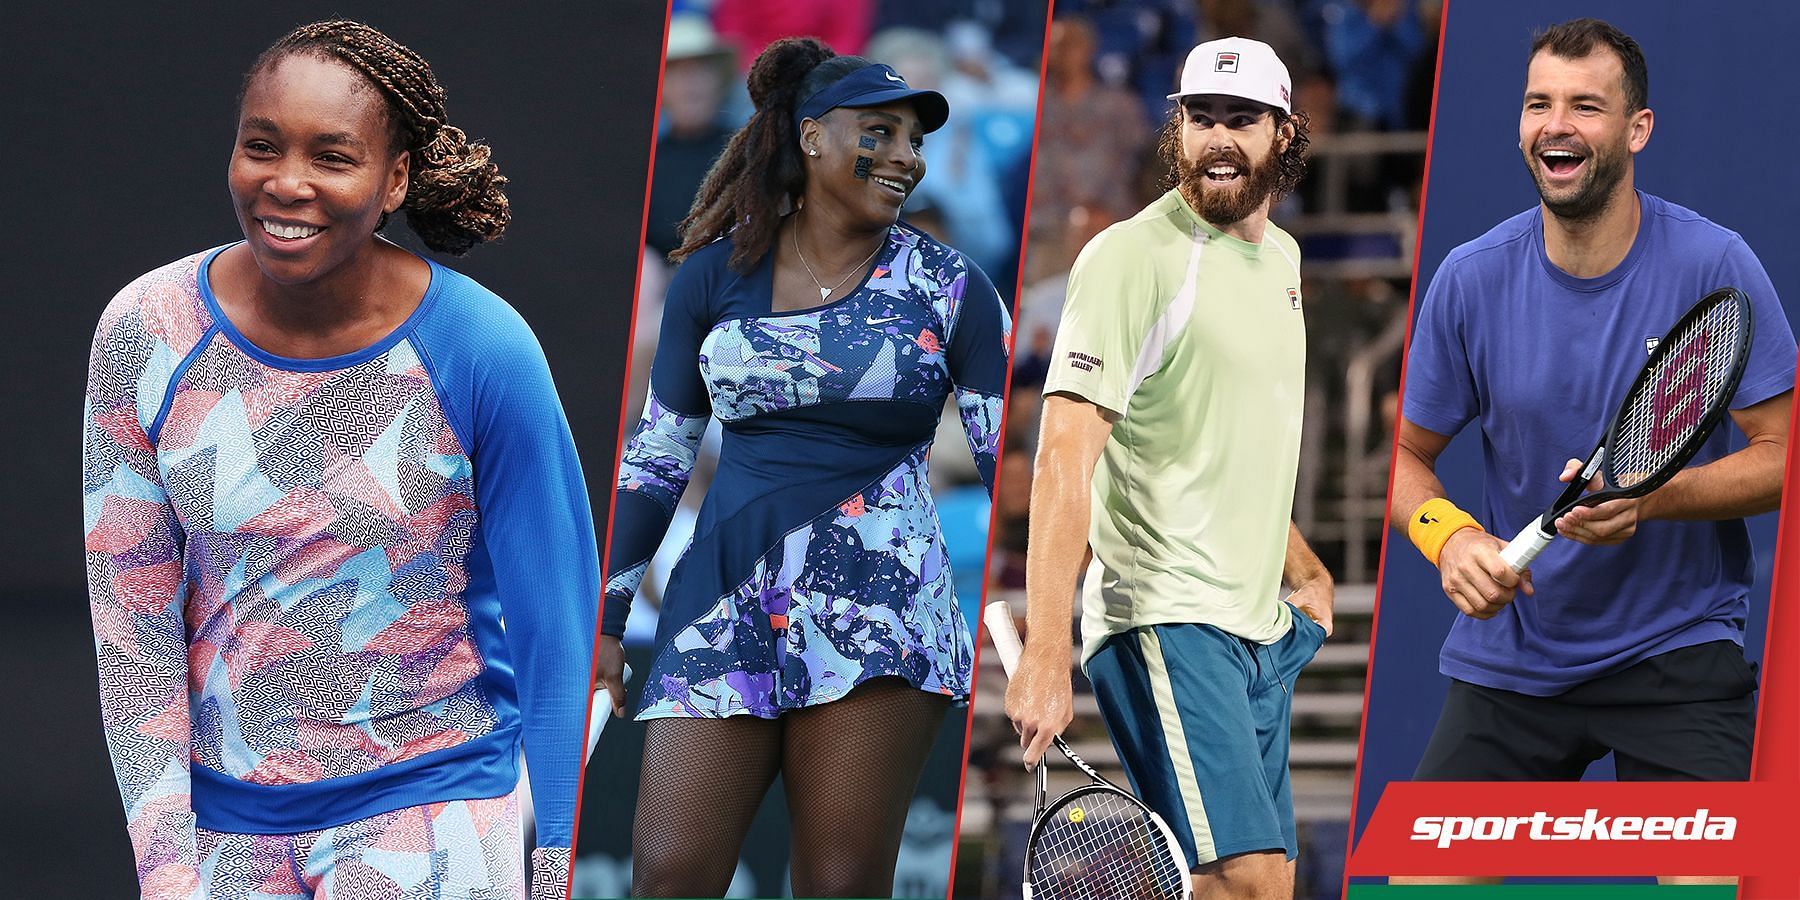 Venus Williams picked the three players to invite for dinner.